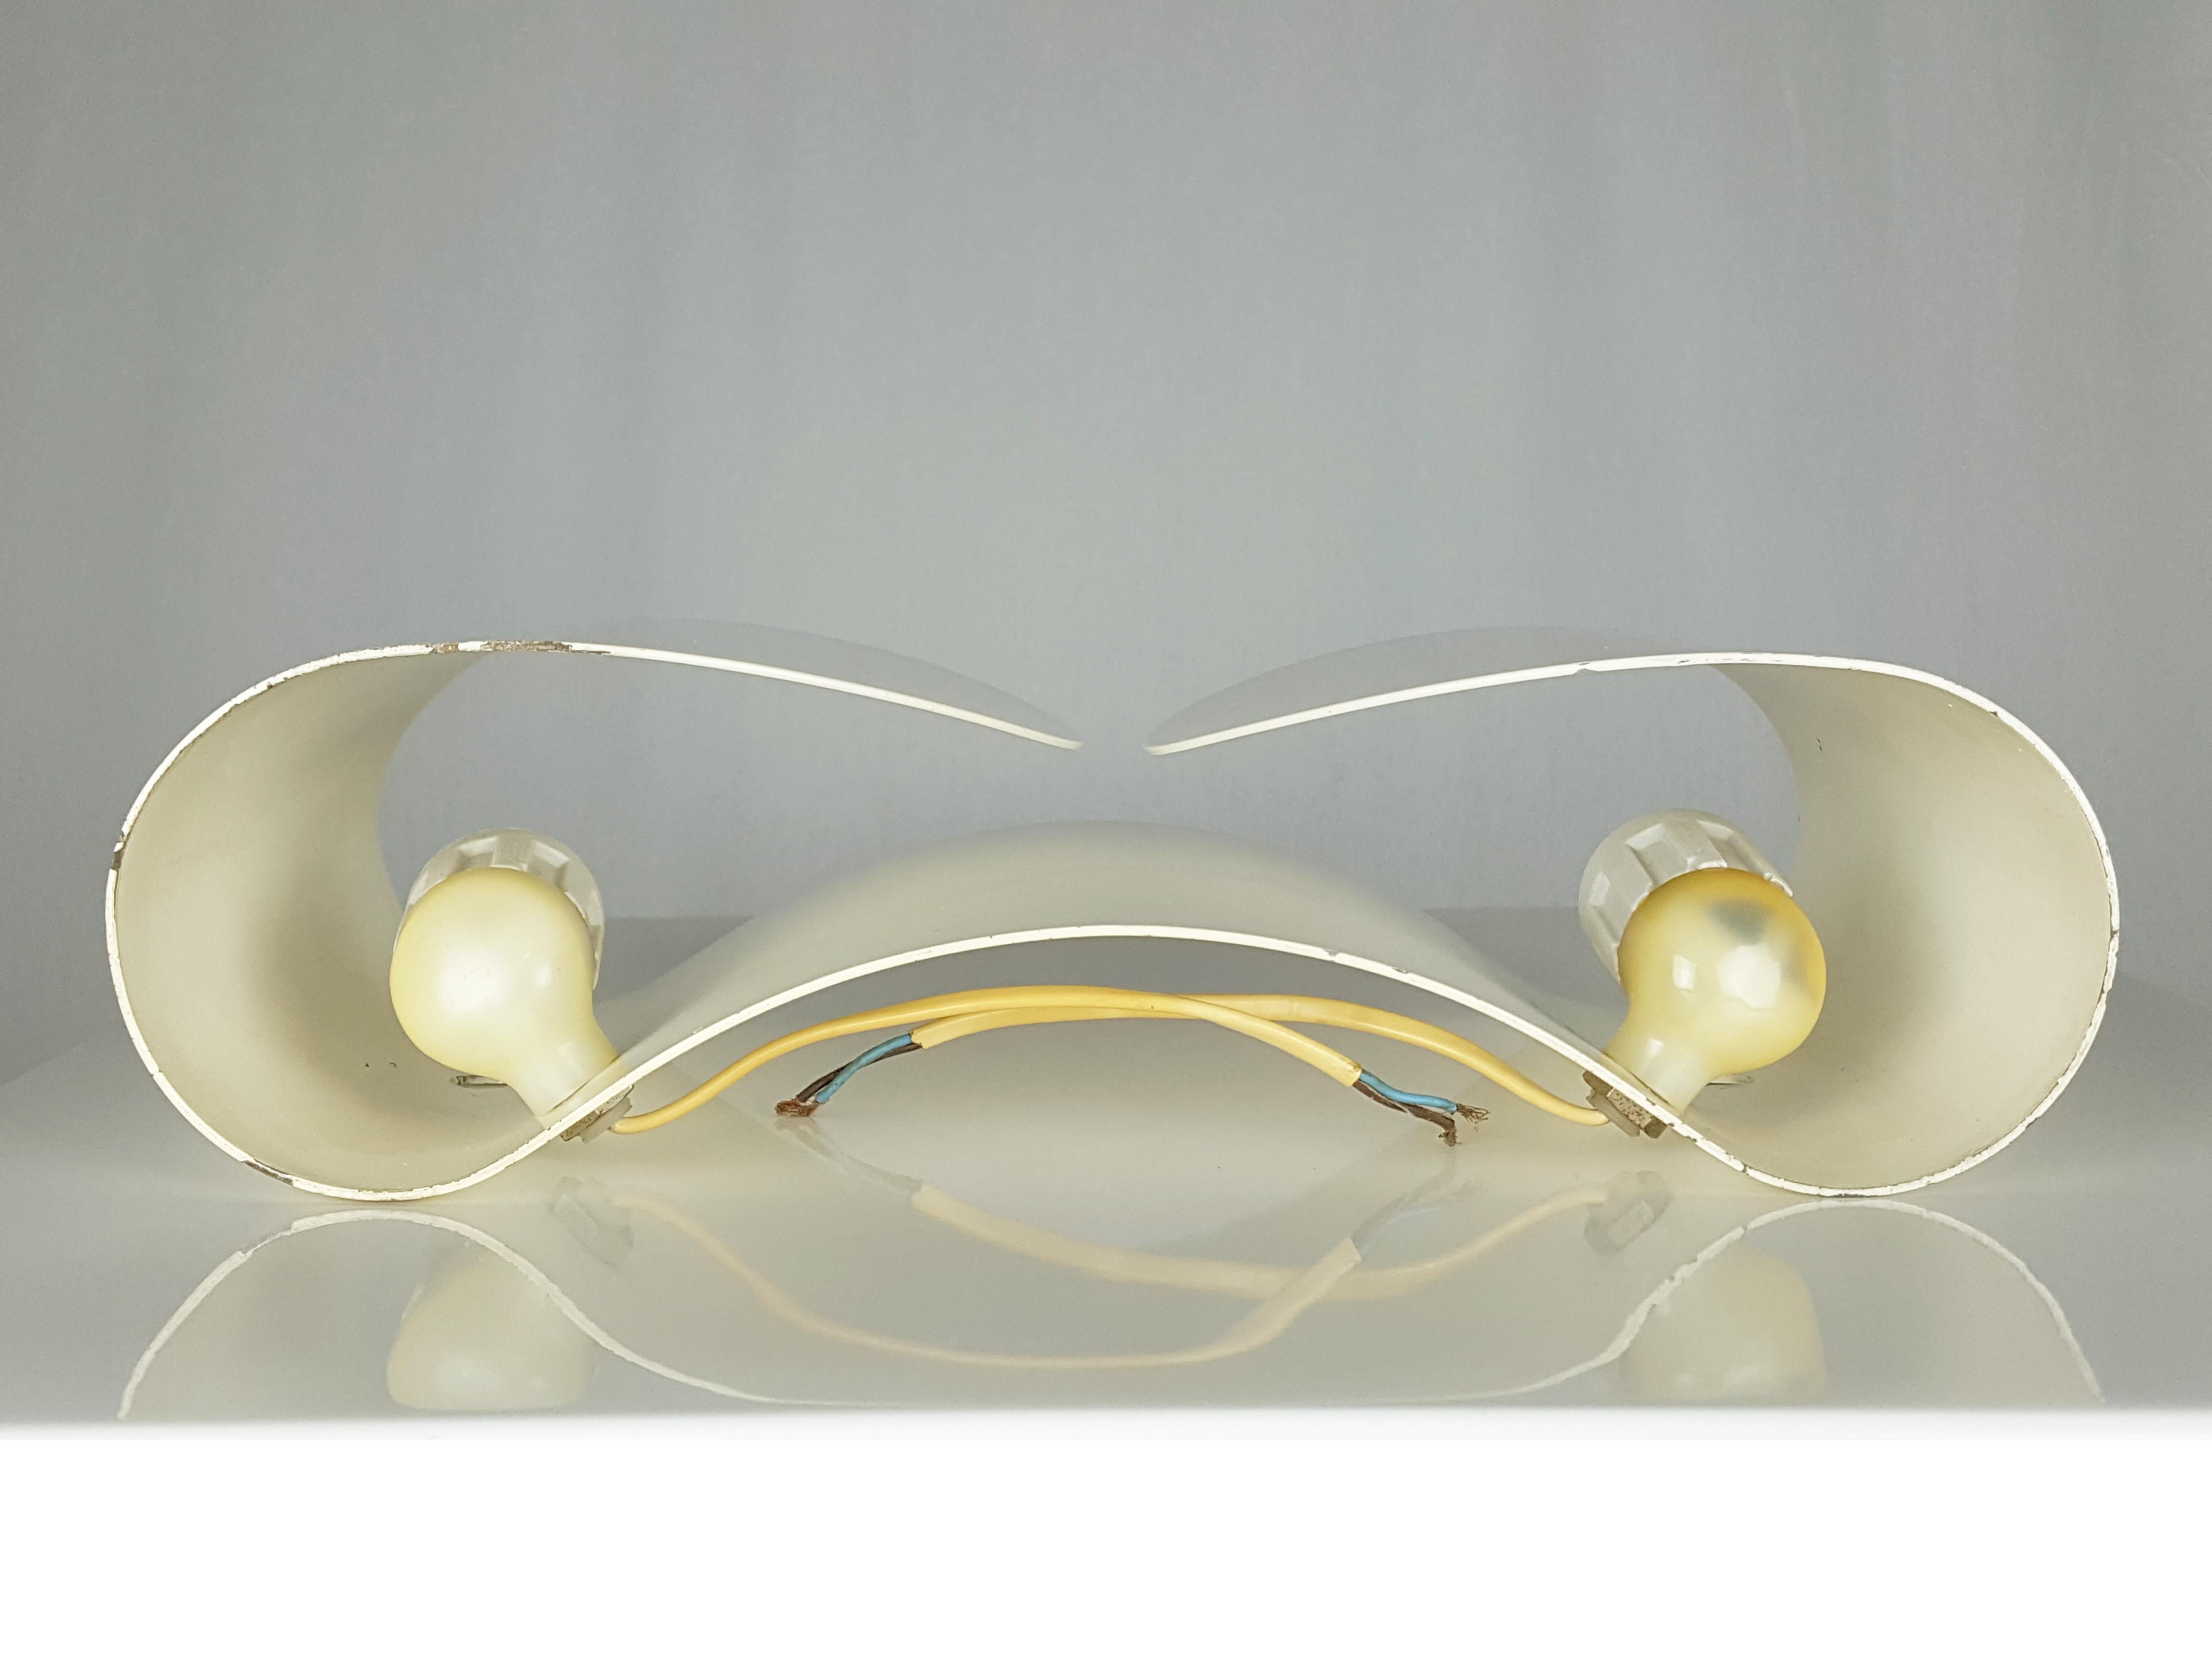 White Laquered Metal 2-Lights Sconce Foglio by Afra Tobia Scarpa for Flos, 1966 For Sale 2